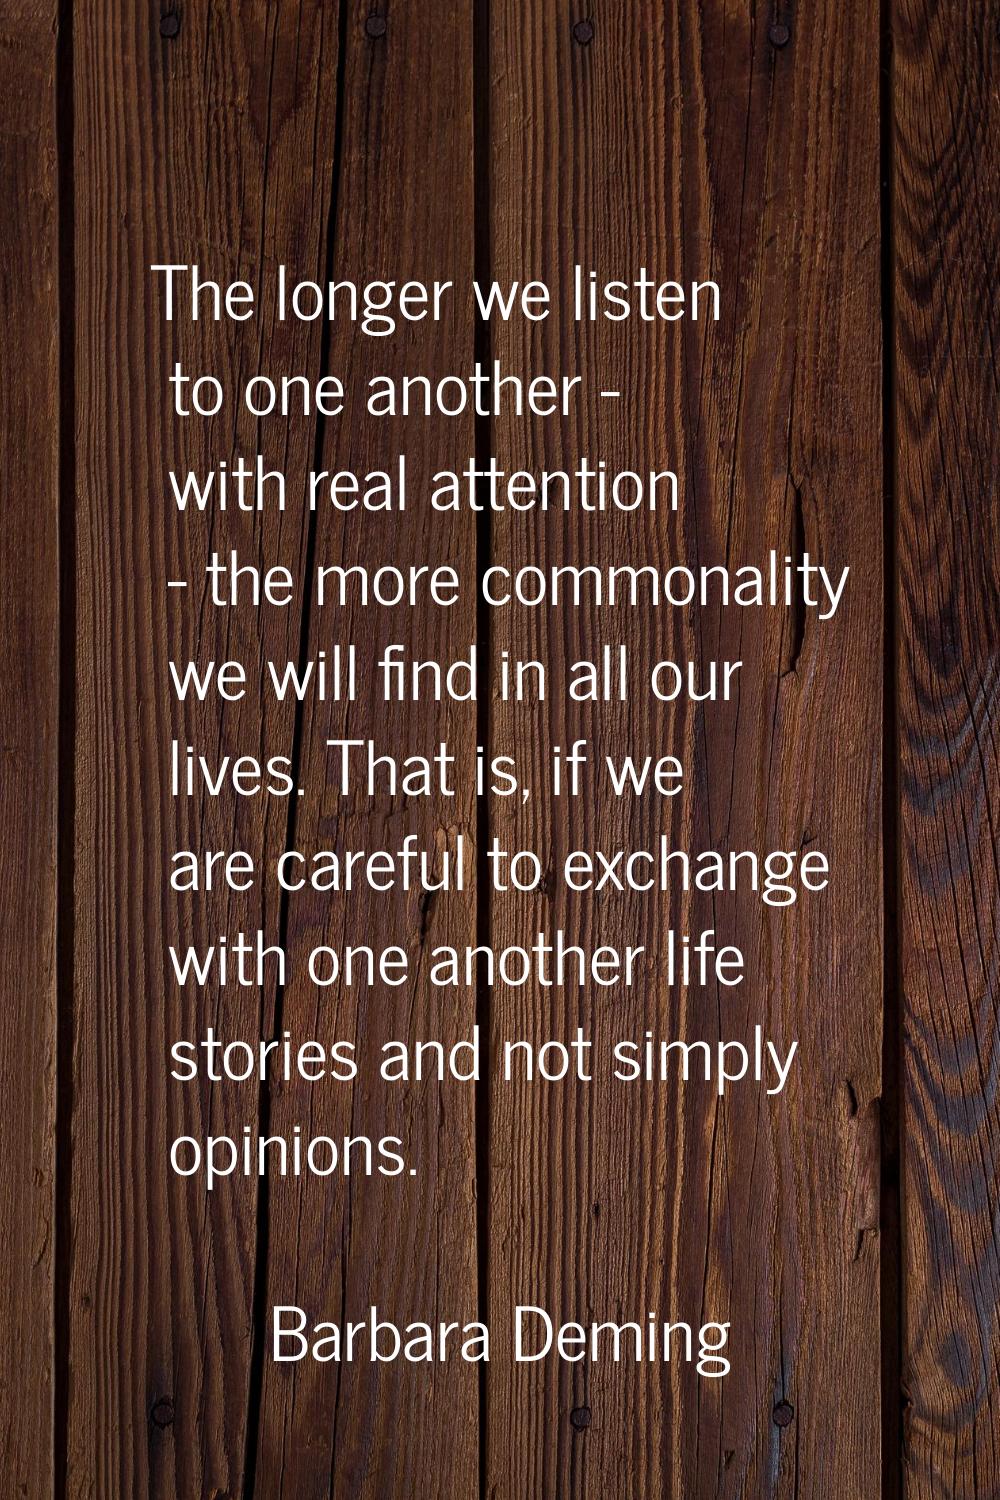 The longer we listen to one another - with real attention - the more commonality we will find in al